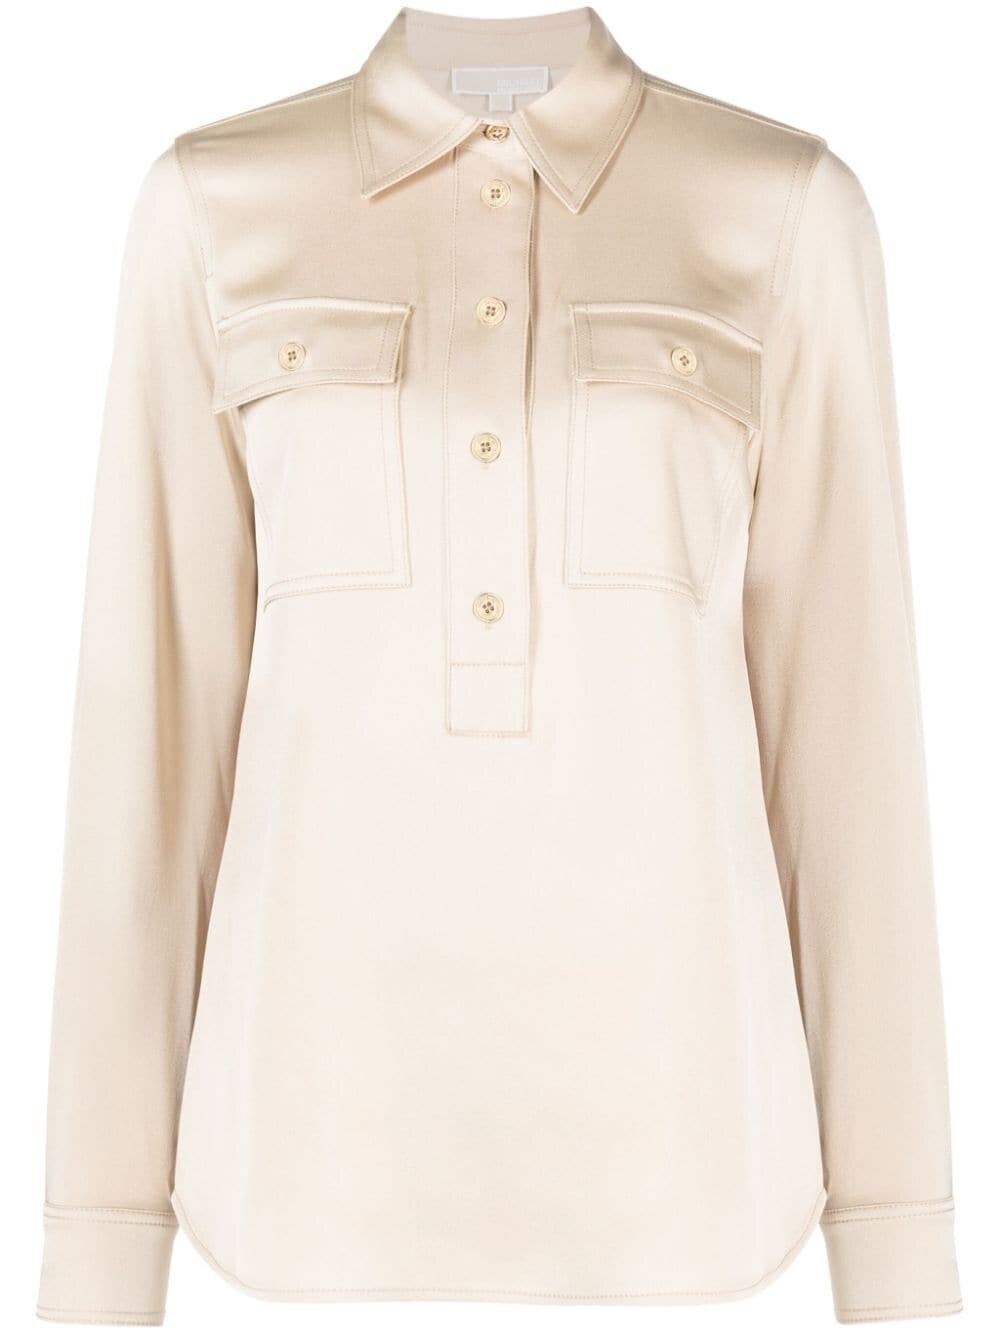 Michael Kors Patch Pocket Shirt In White